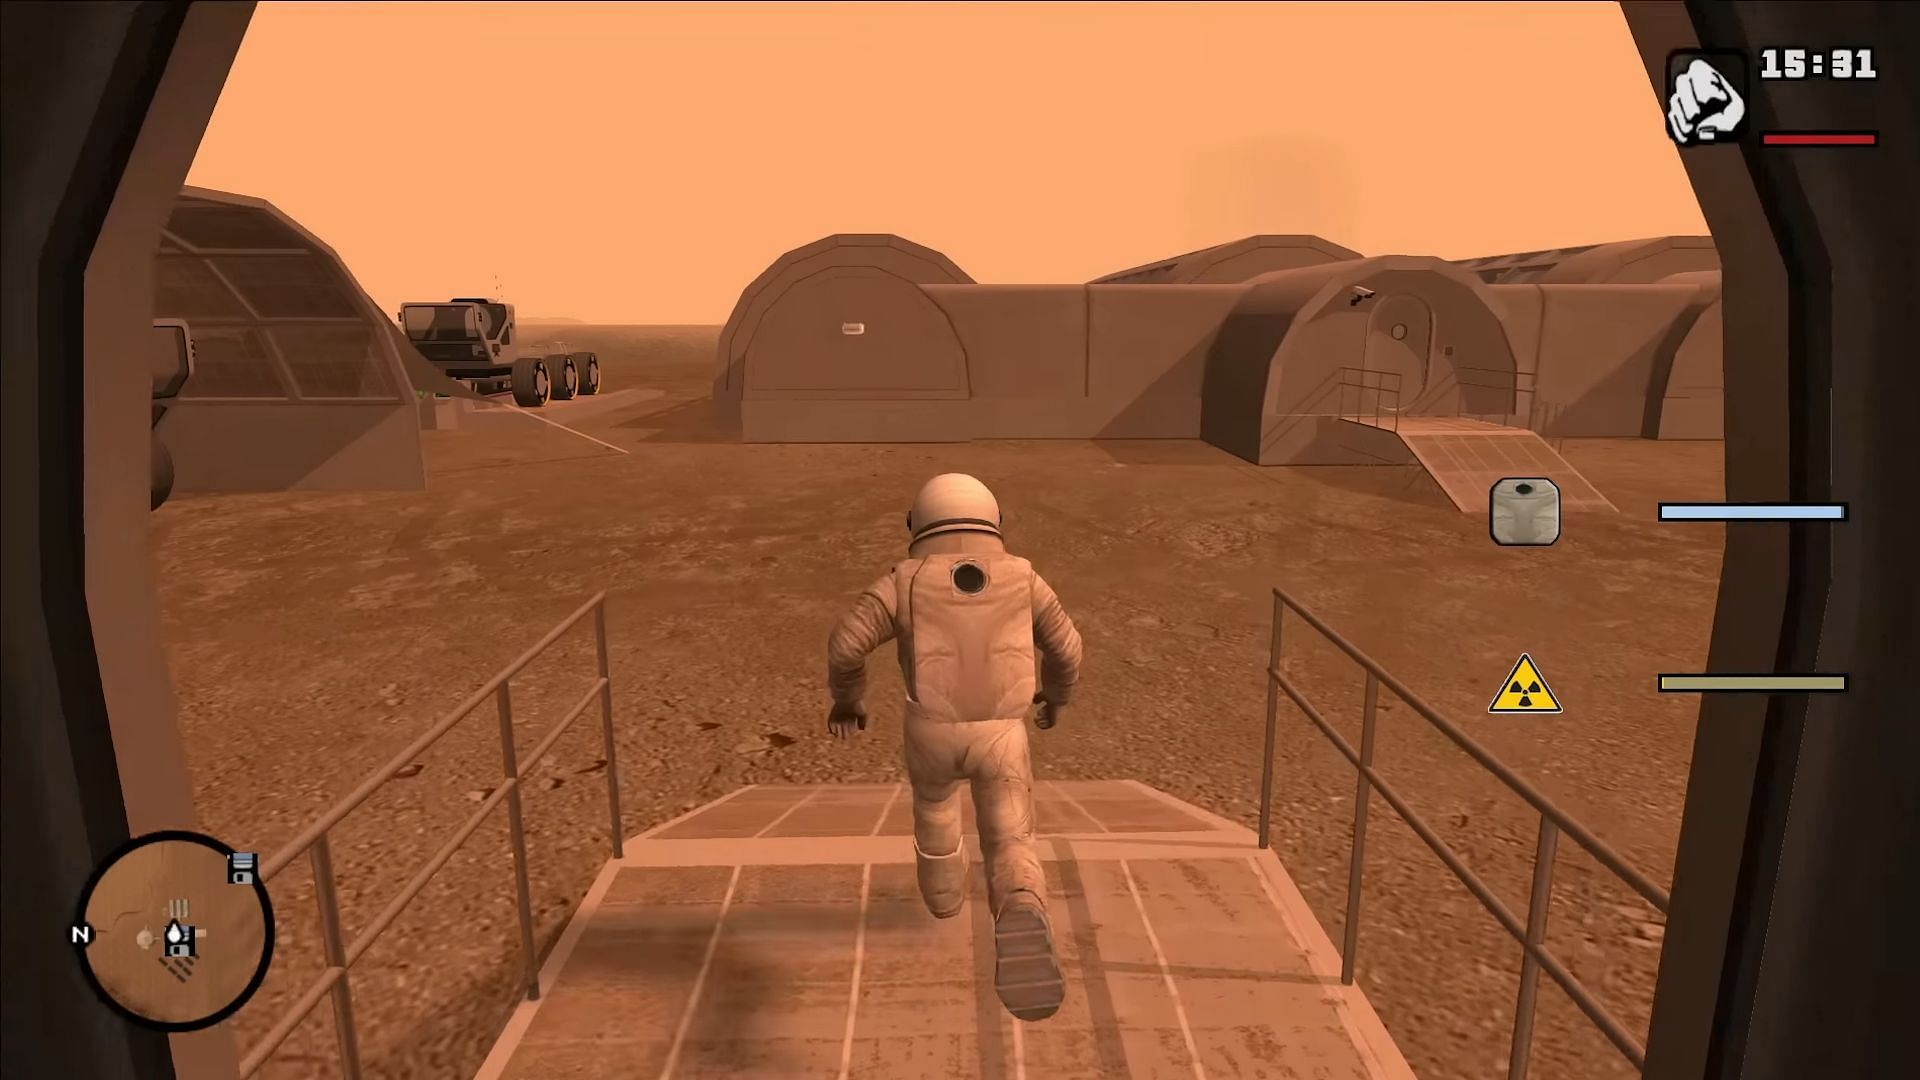 GTA San Andreas map mods are incredibly diverse, with this particular one being a Mars-themed location